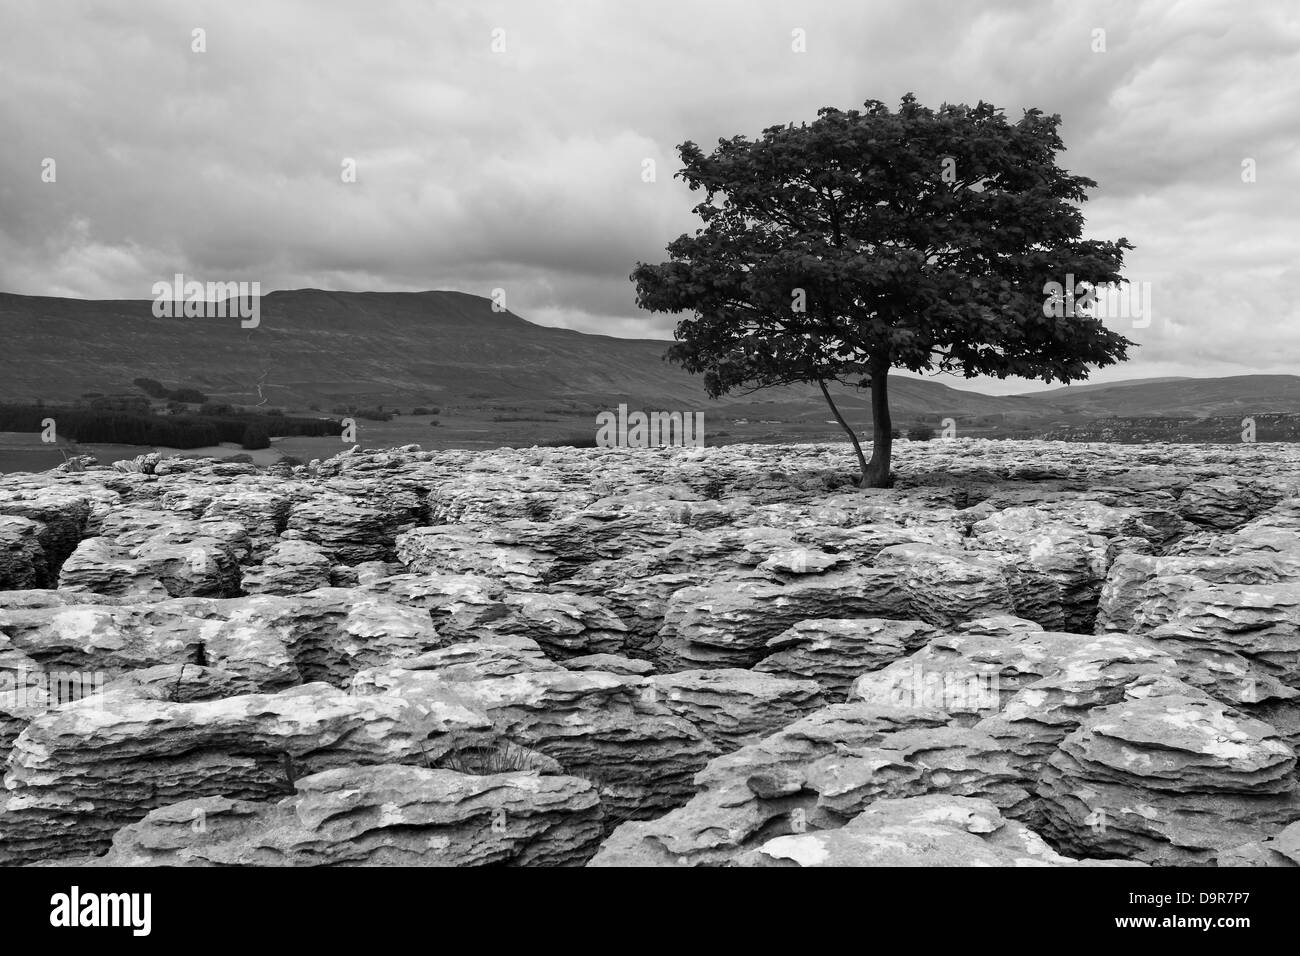 A tree grows in limestone pavement at Souther Scales Moor, with a view to Whernside in the Yorkshire Dales, England Stock Photo